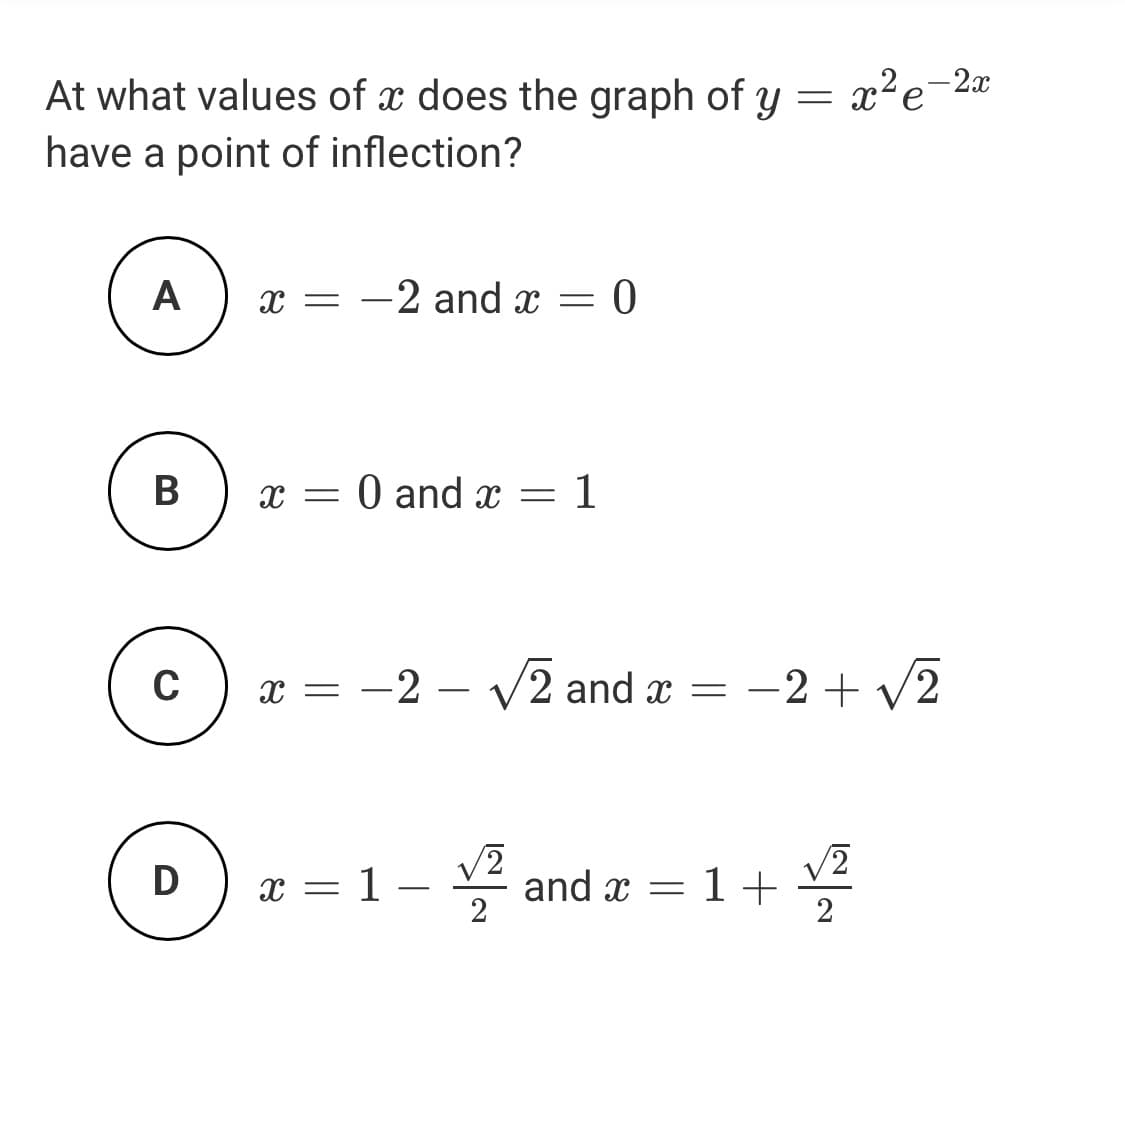 At what values of x does the graph of y
x²e-2x
have a point of inflection?
A
-2 and x =
В
x = 0 and x =
: 1
C
x = -2 – V2 and x = -2 + v2
: -2+
D
x = 1 – and x = 1+ 2
2
